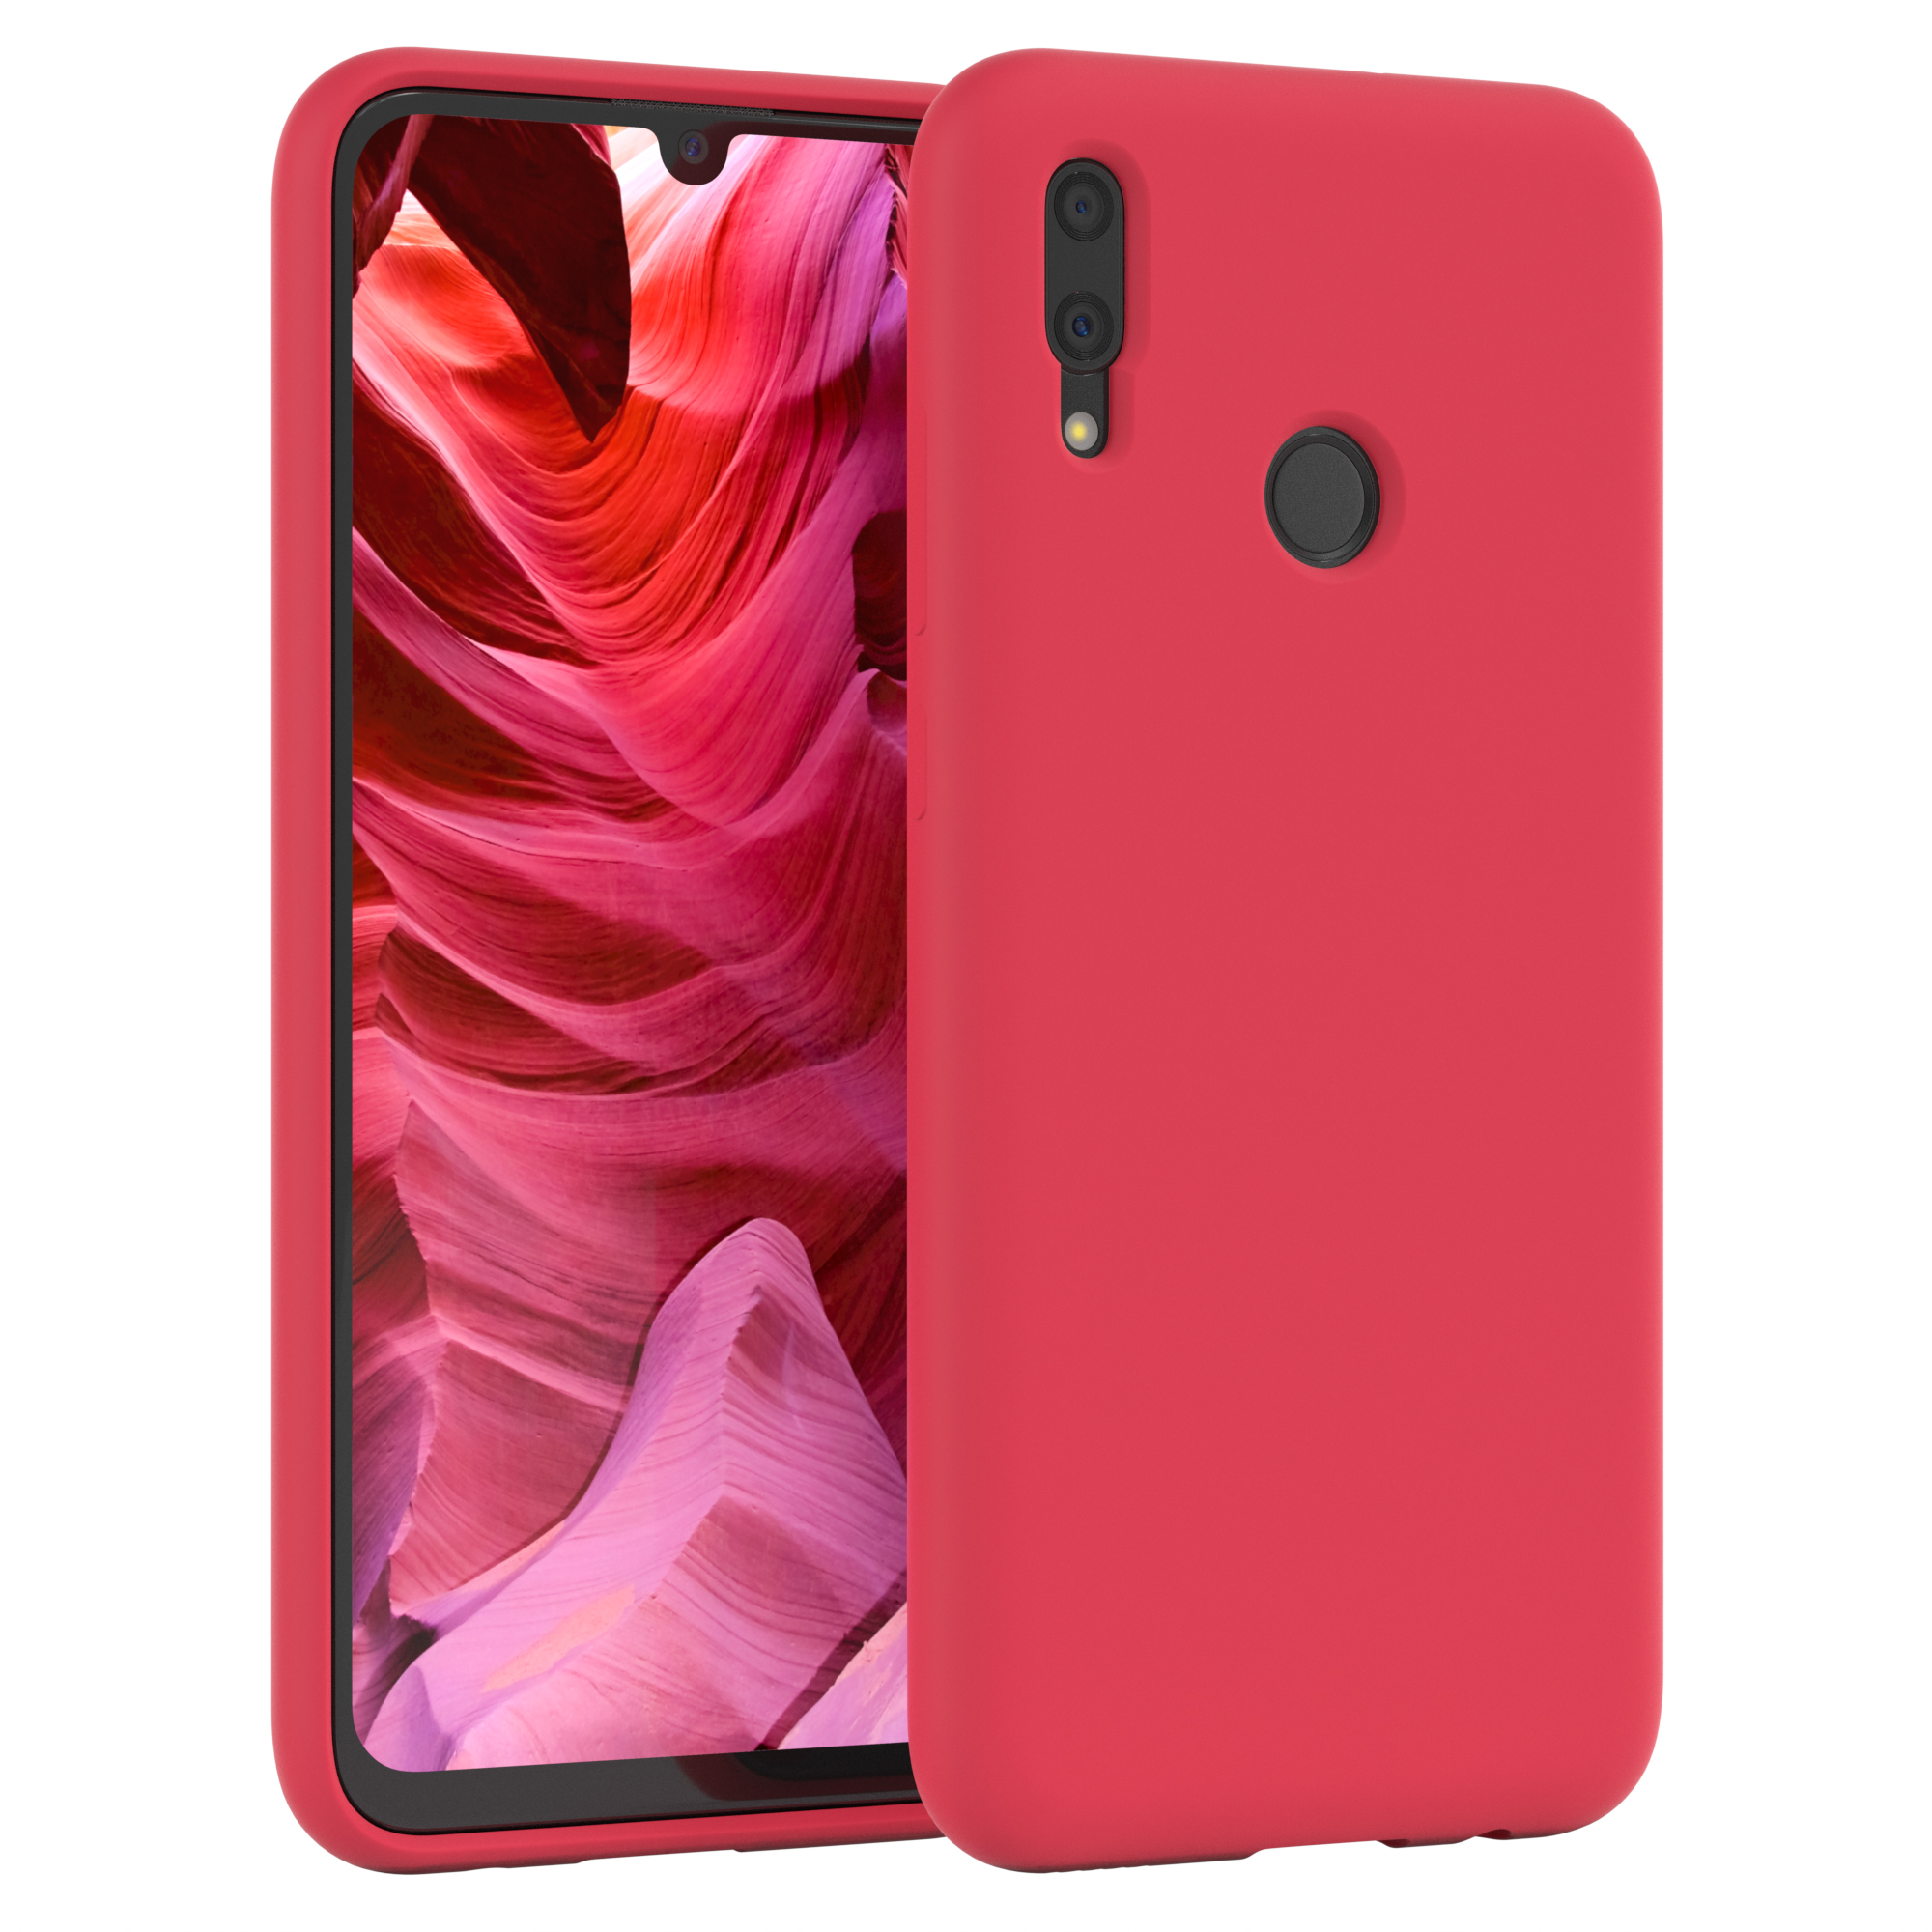 EAZY CASE Premium Silikon Beere / Backcover, (2019), Rot Huawei, P Handycase, Smart